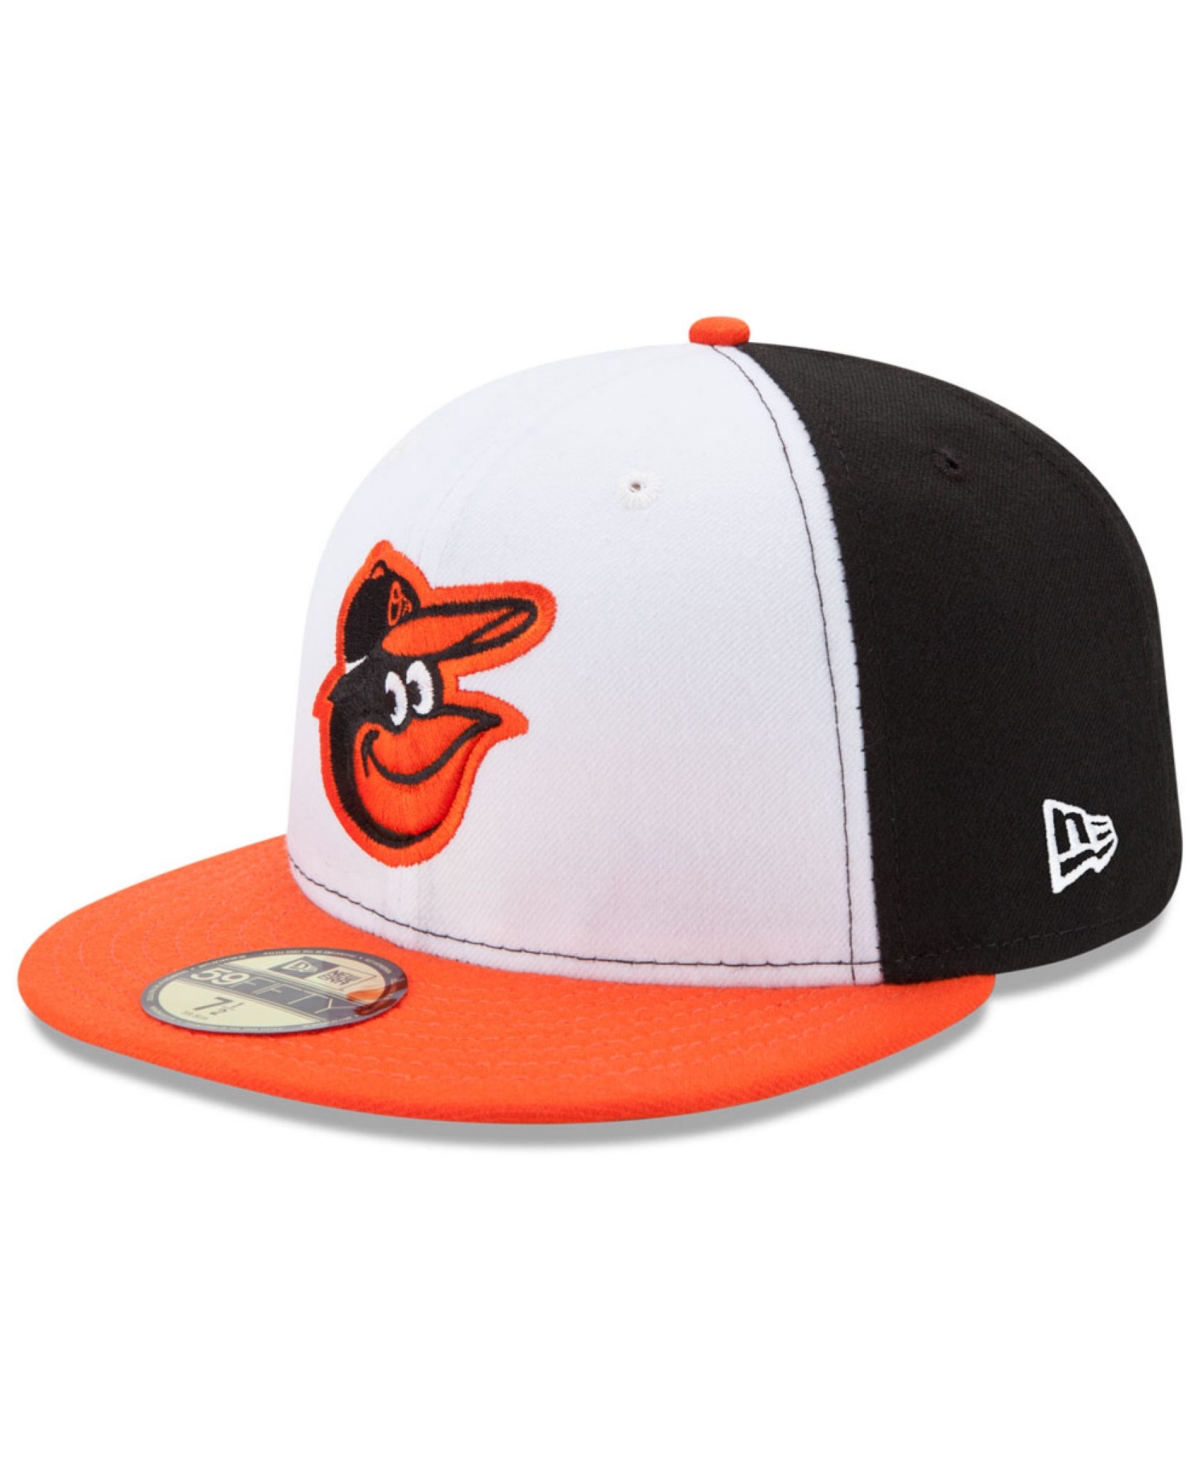 New Era Baltimore Orioles Authentic Collection 59fifty Fitted Cap In Black,white,orange